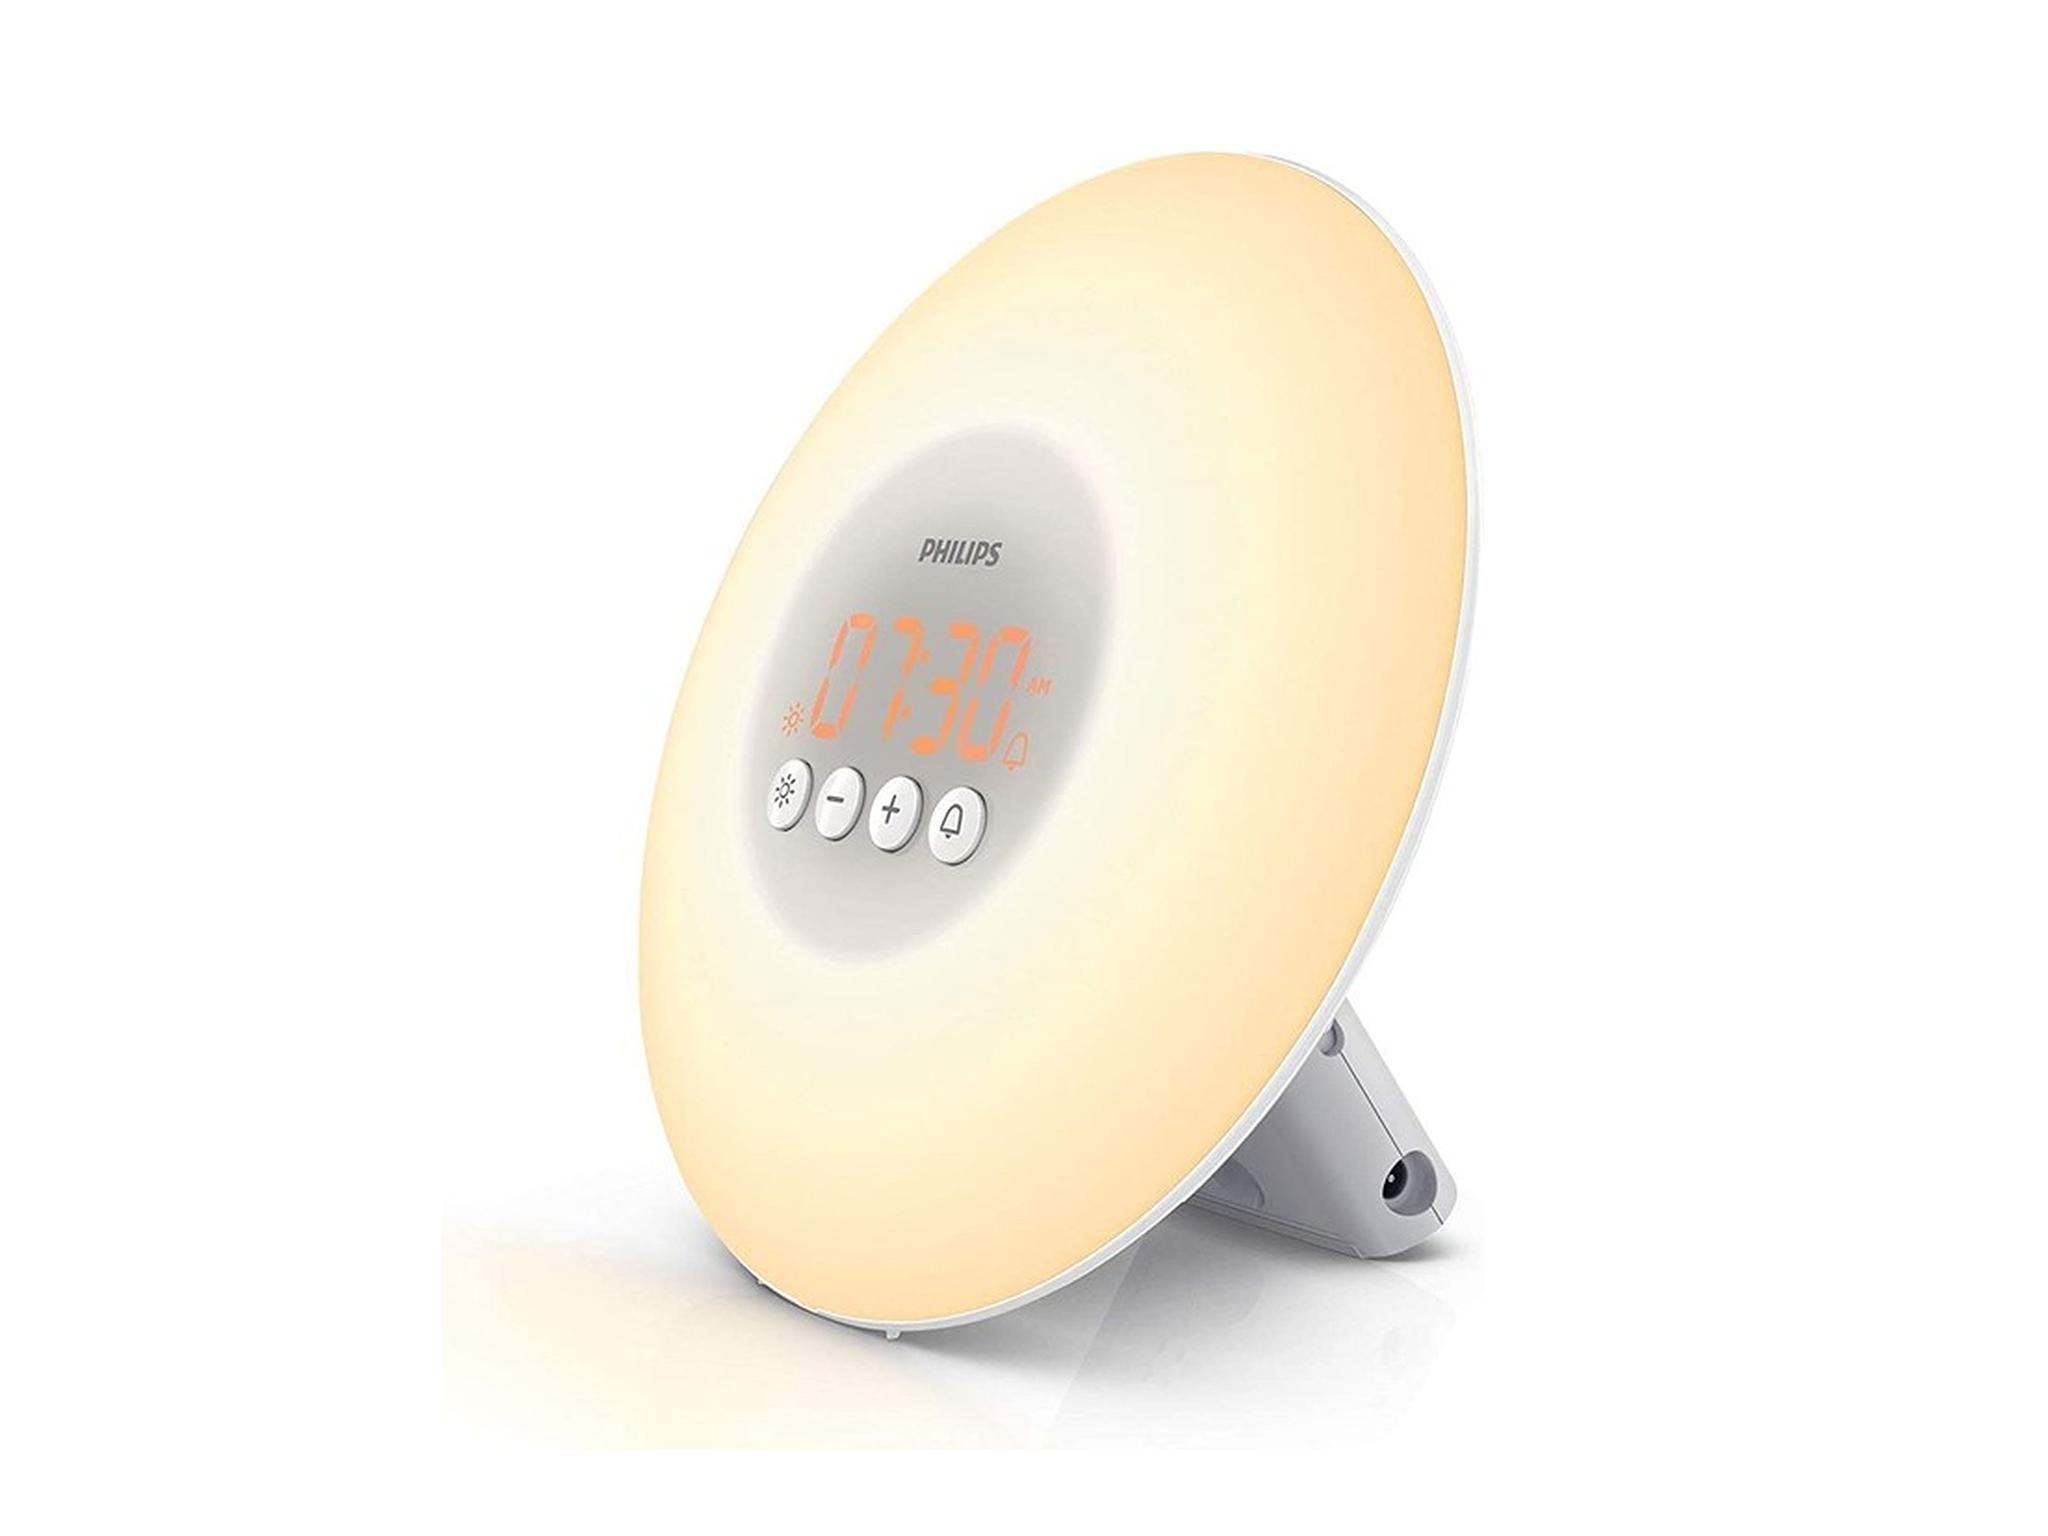 Philips wake up light.png